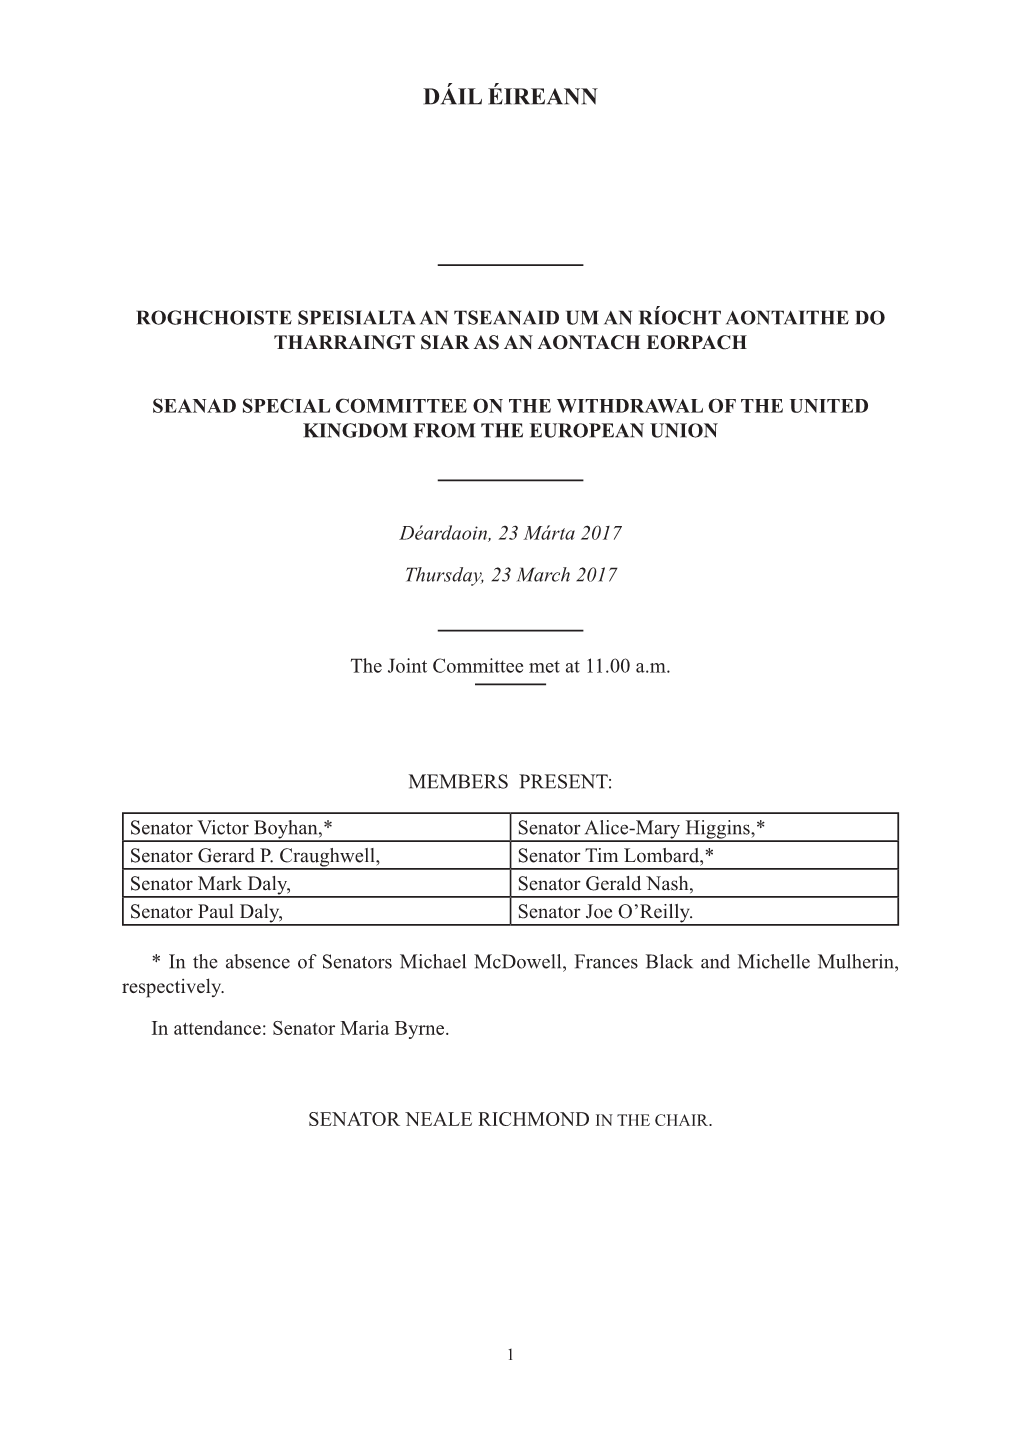 230317 Seanad Special Committee on the Withdrawl of the UK from the EU